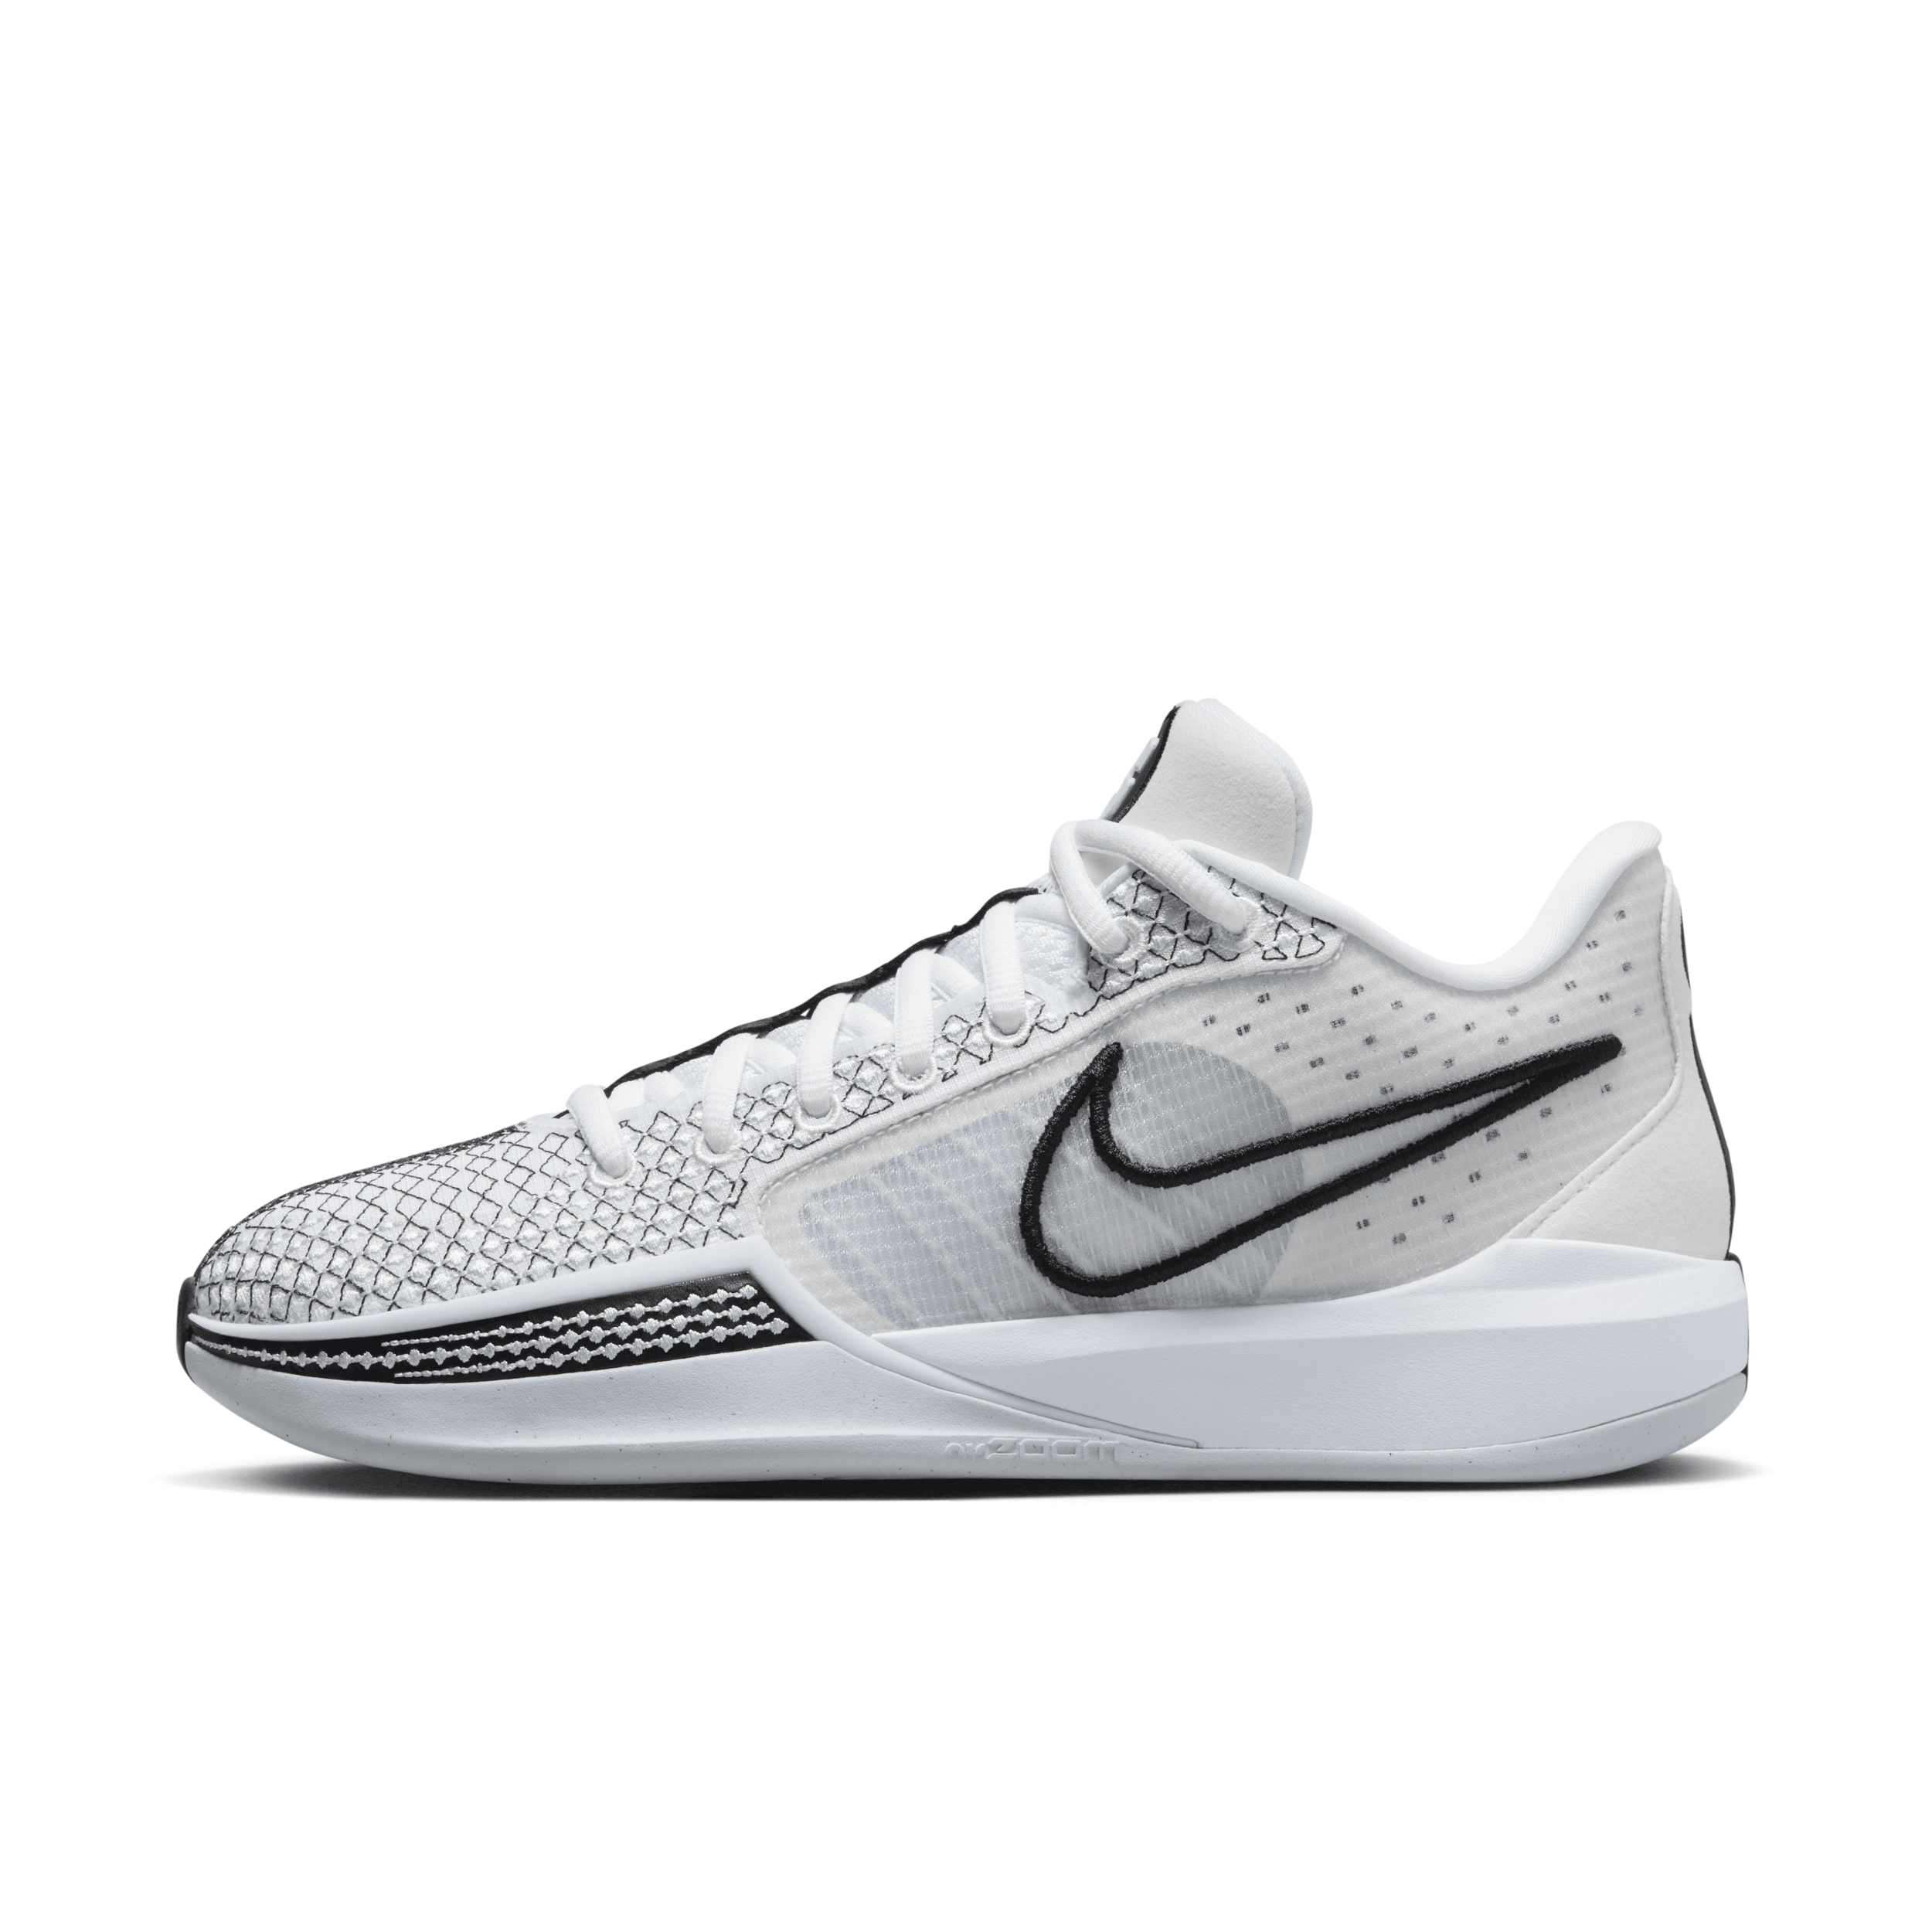 Nike Women's Sabrina 1 "magnetic" Basketball Shoes In White